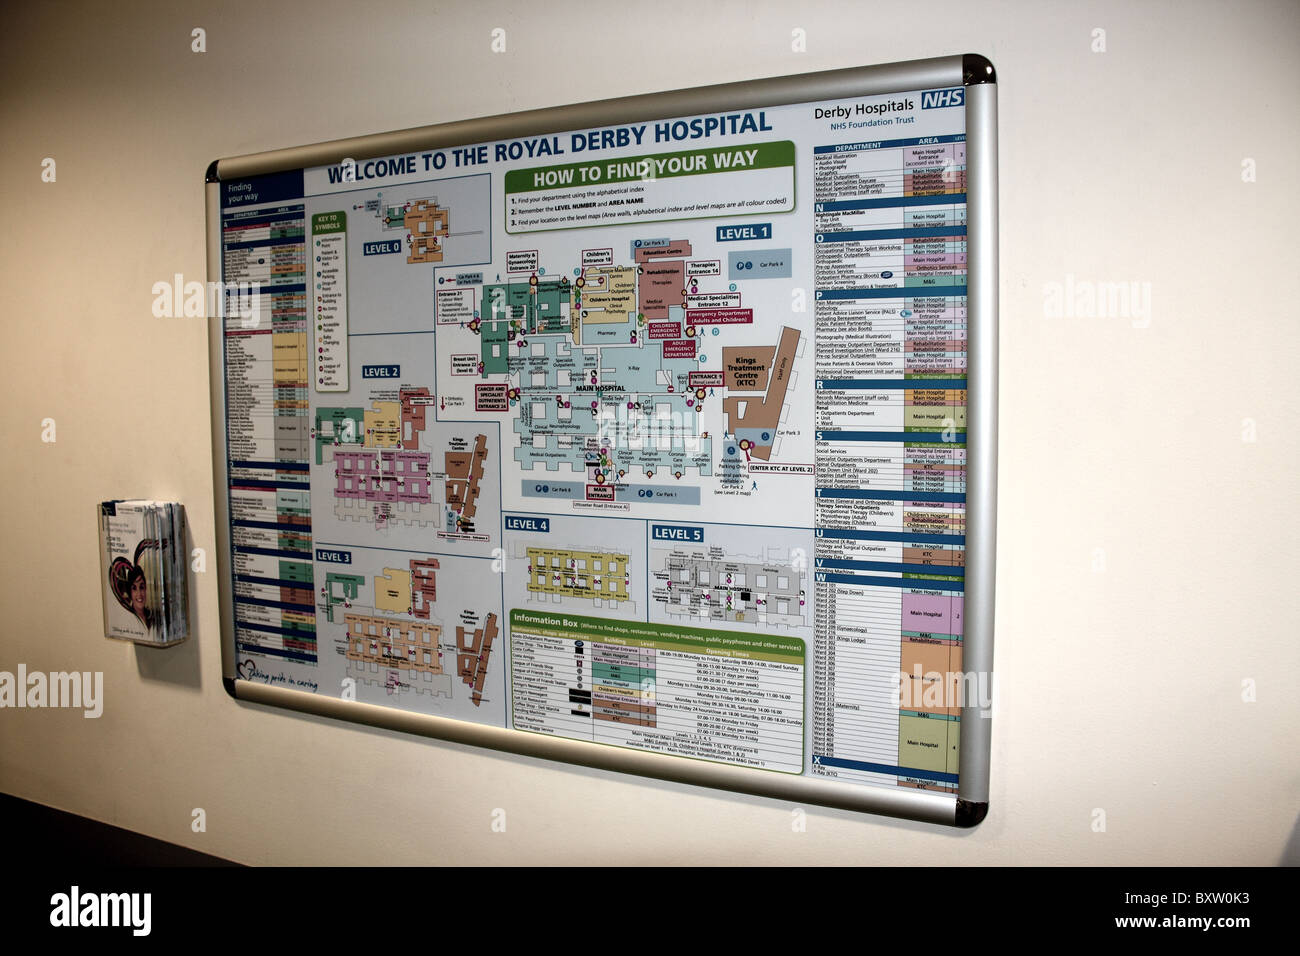 royal derby map A Map Of The Royal Derby Hospital Stock Photo Alamy